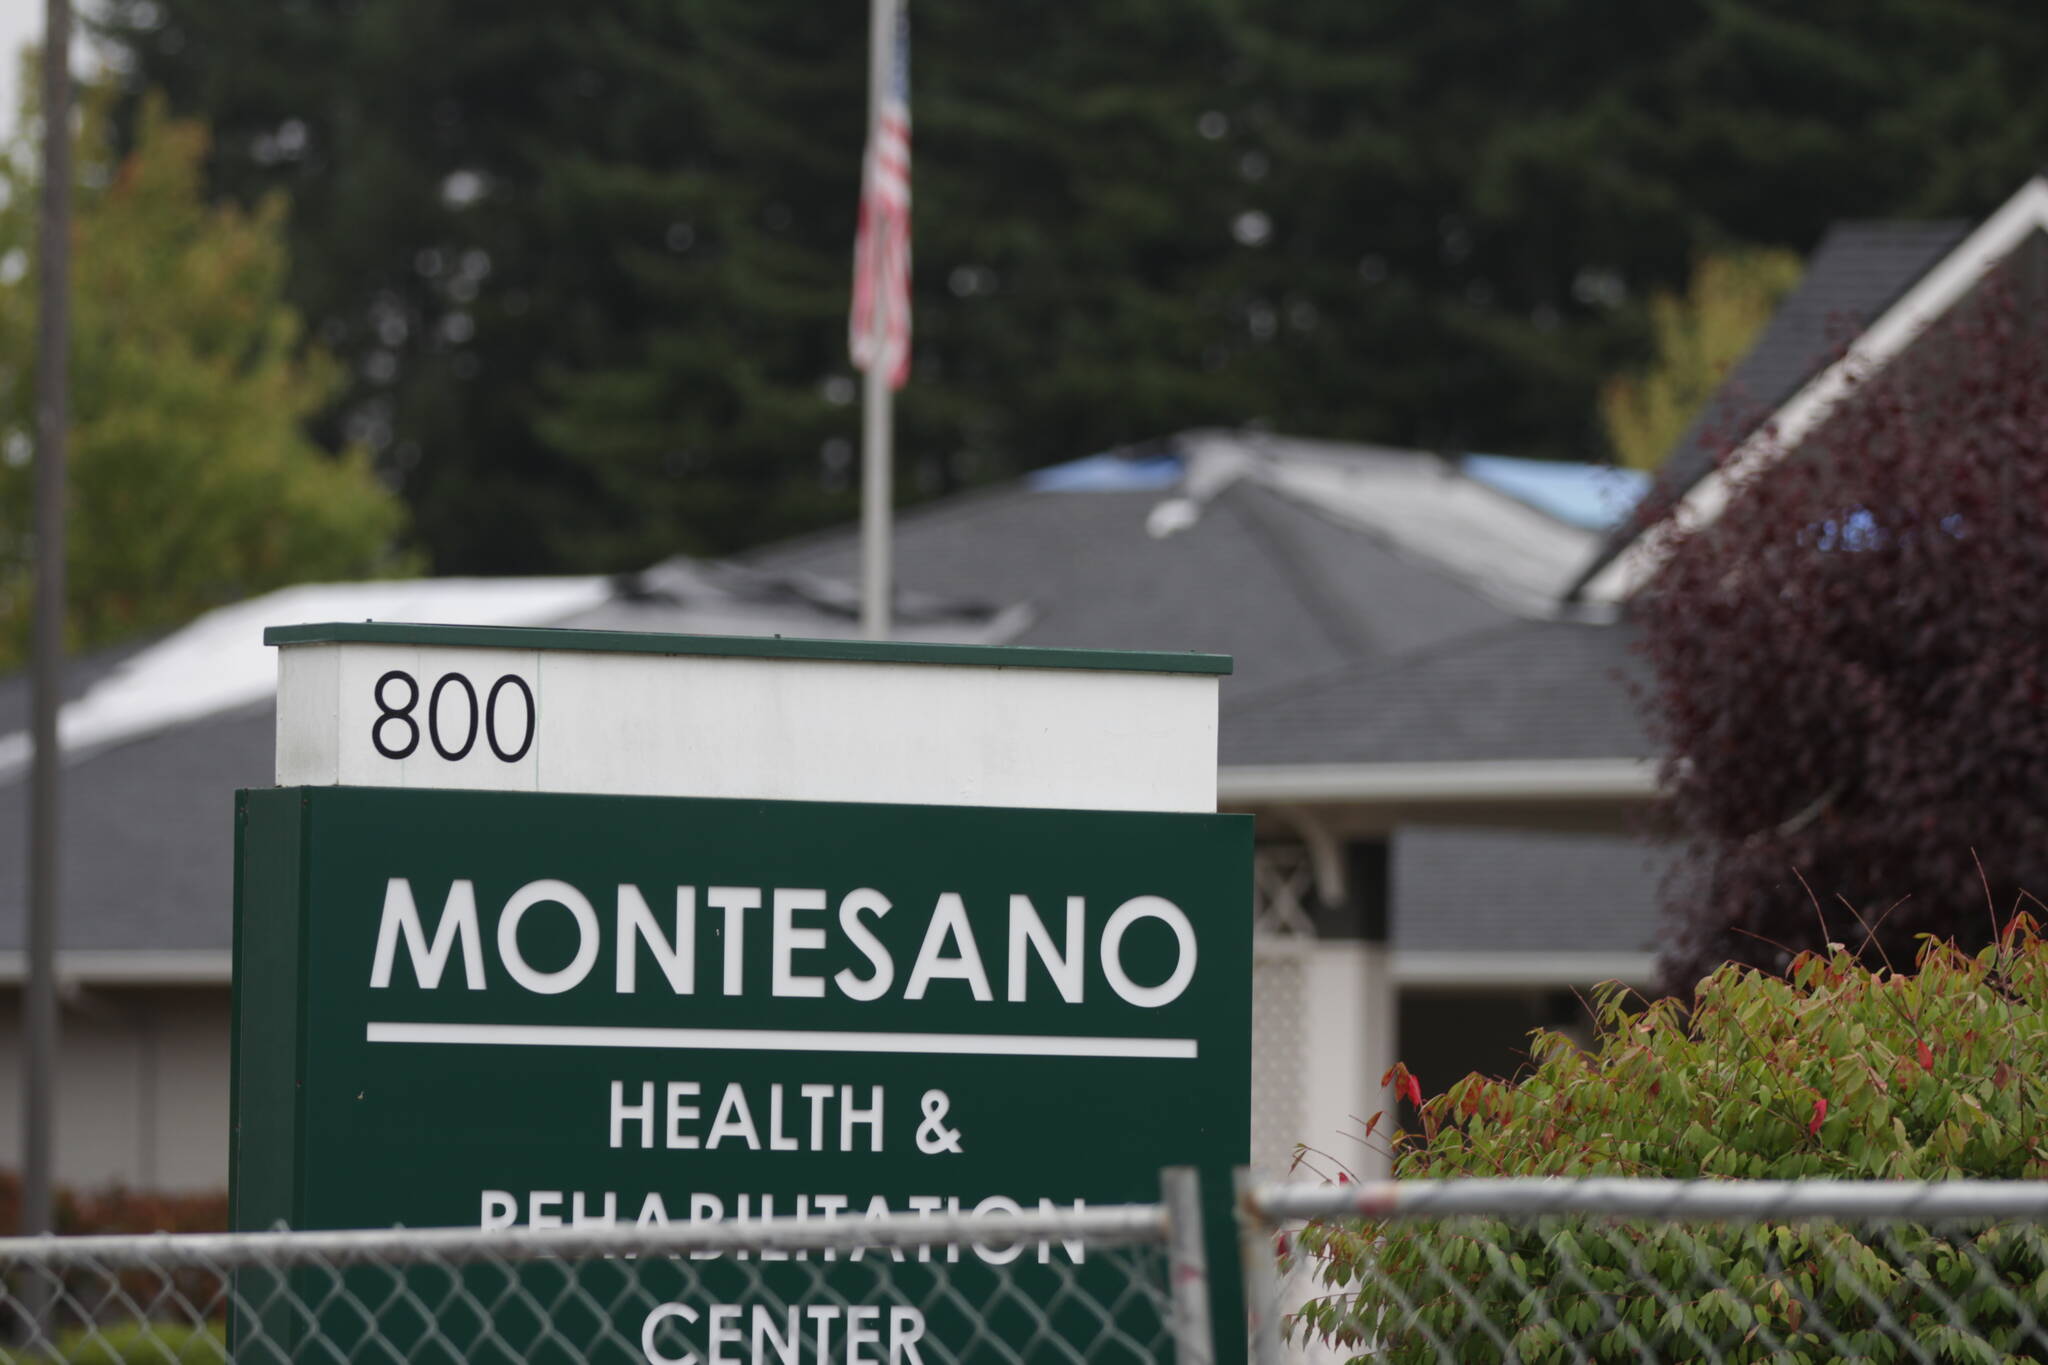 Michael S. Lockett / The Daily World
A year after a major fire damaged the facility and displaced residents, the Montesano Health and Rehabilitation Center is still closed.